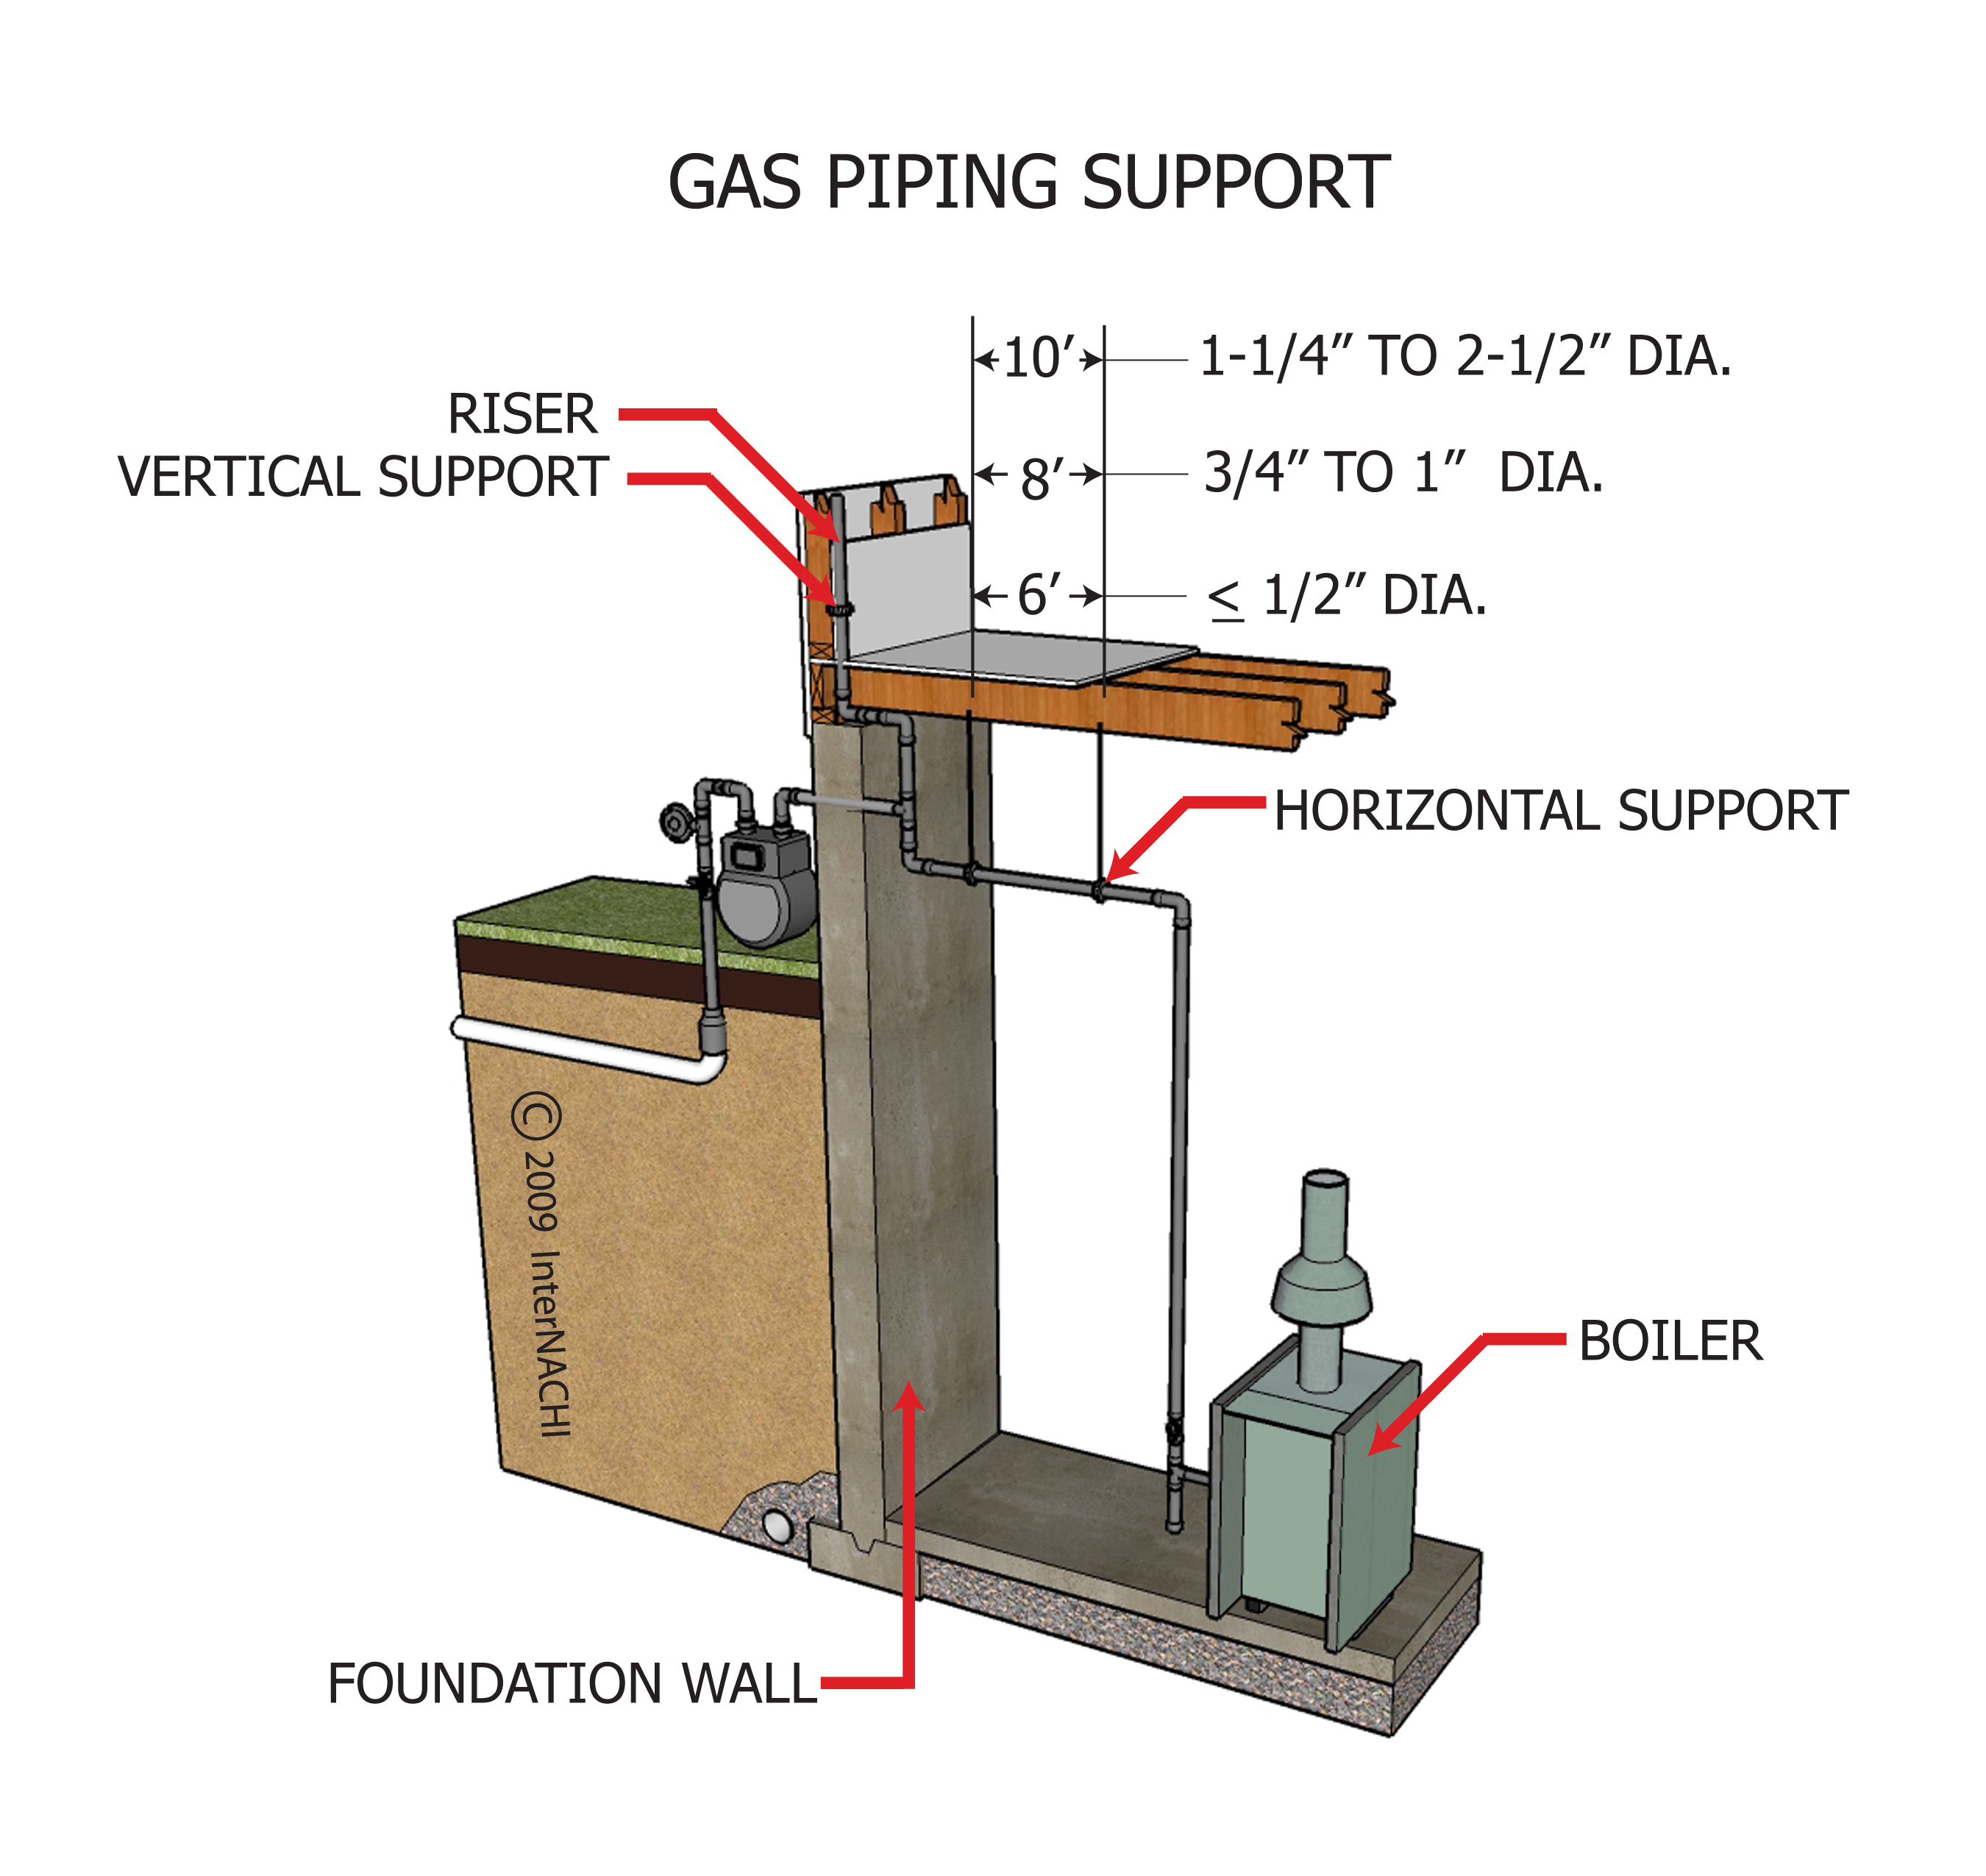 Gas piping support.